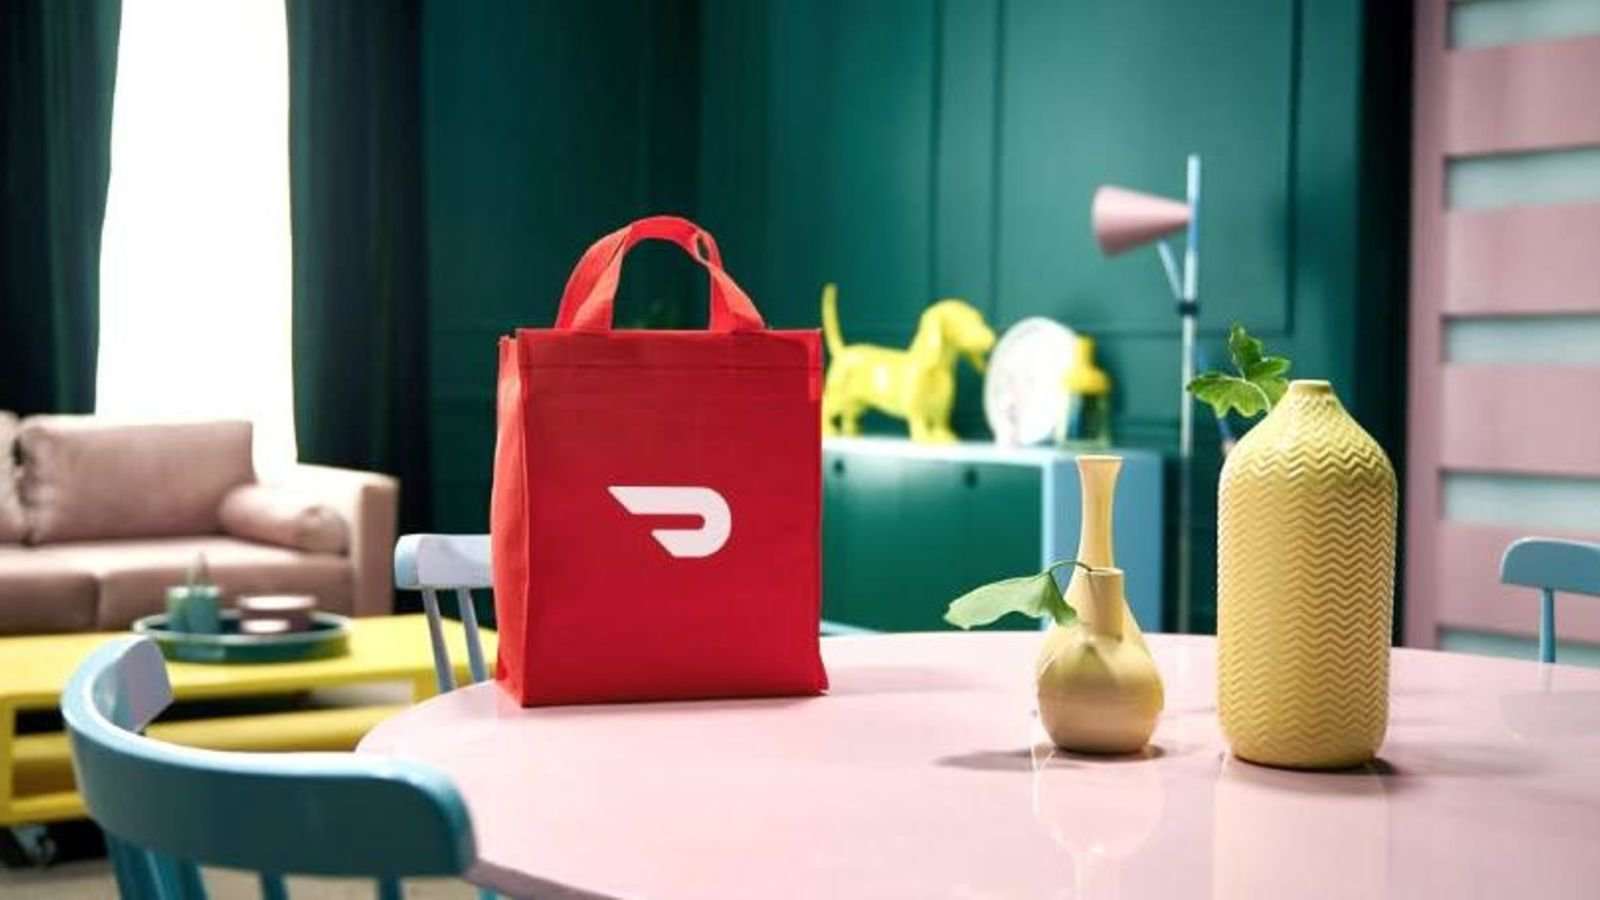 image for DoorDash Says It’s Very Sorry You Noticed Its Tip-Skimming Scheme